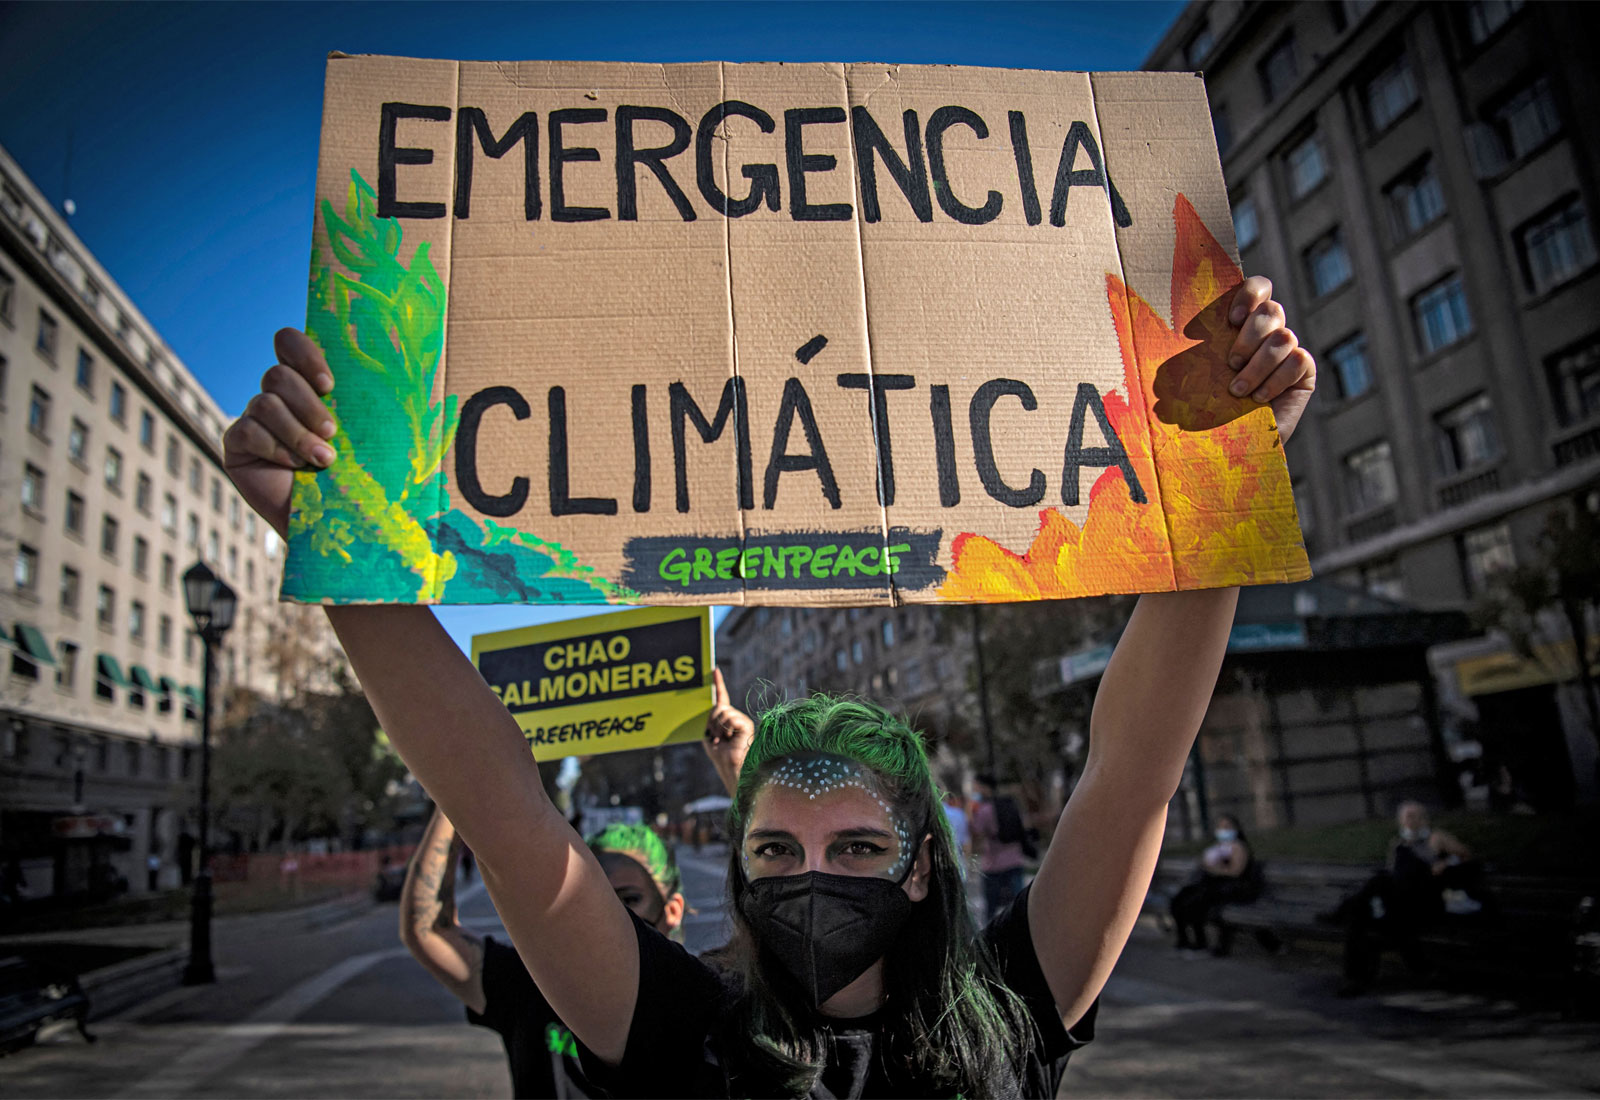 Woman with green hair and mask holding cardboard sign with leaves and flames that reads "emergencia climática"